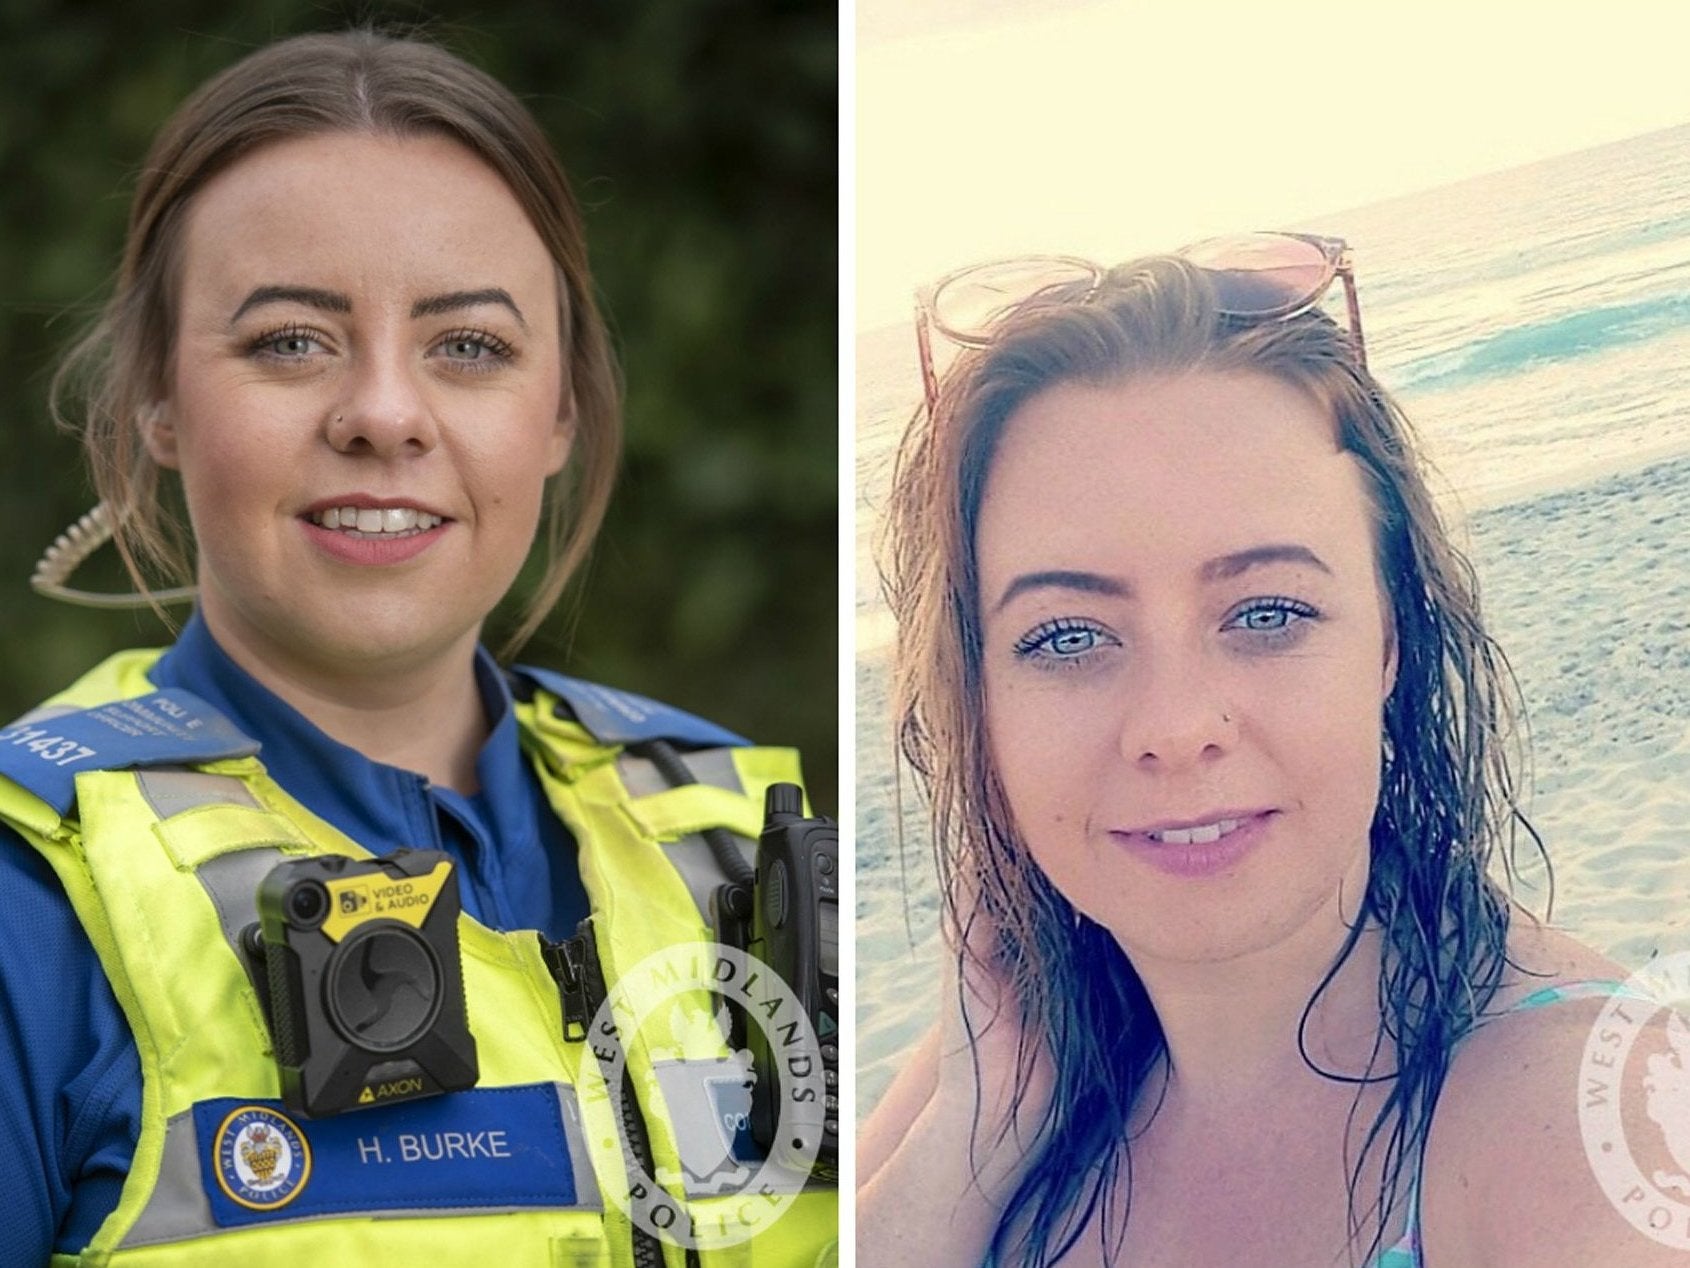 Police community support officer Holly Burke, 28, who died in a crash after a car being followed by police failed to stop